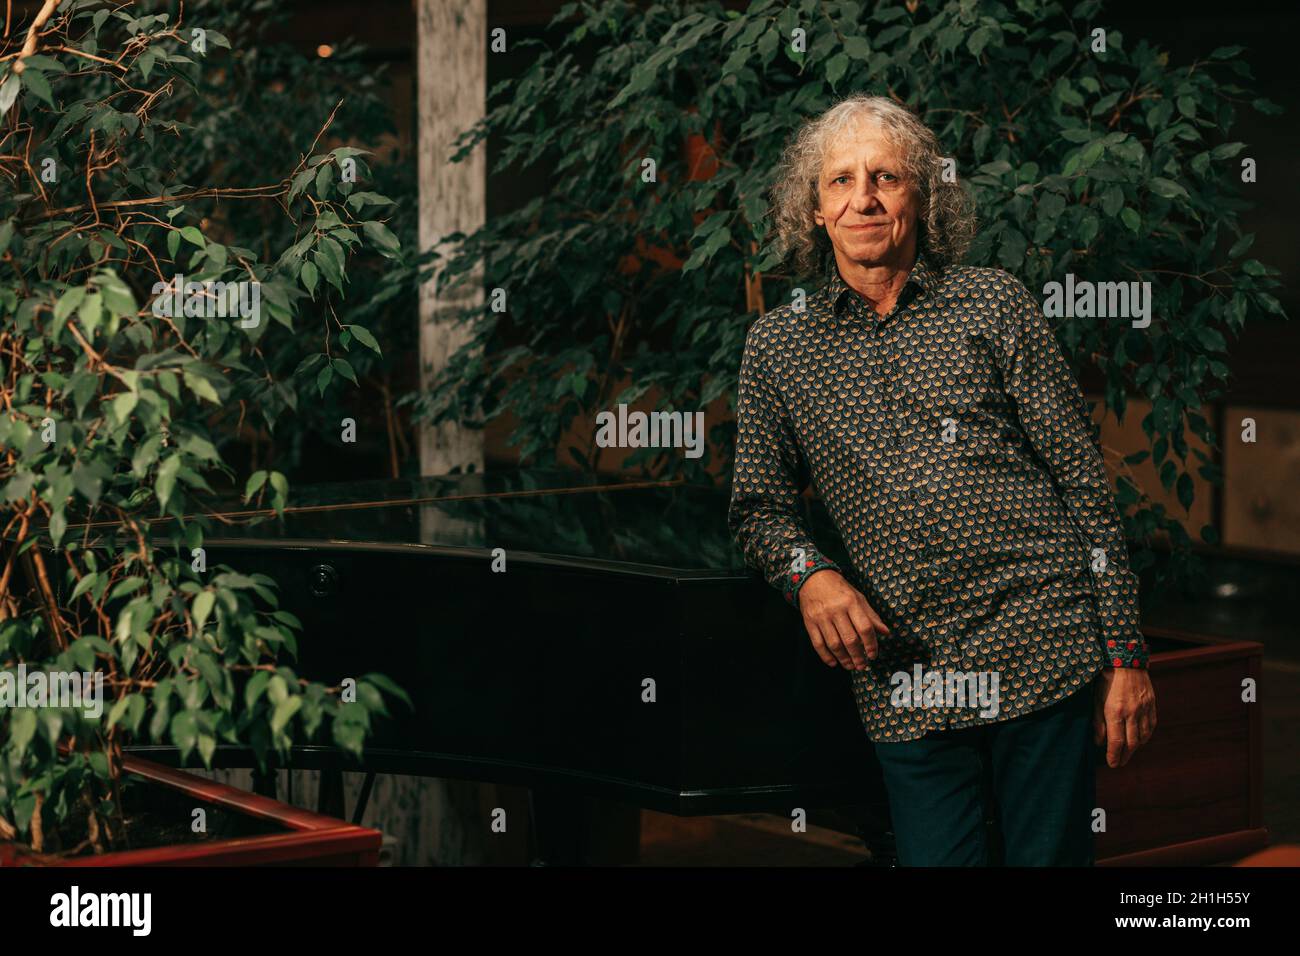 portrait of 65-year-old mature man at piano musical instrument in lobby of hotel gray curly hair, charismatic appearance. Stock Photo